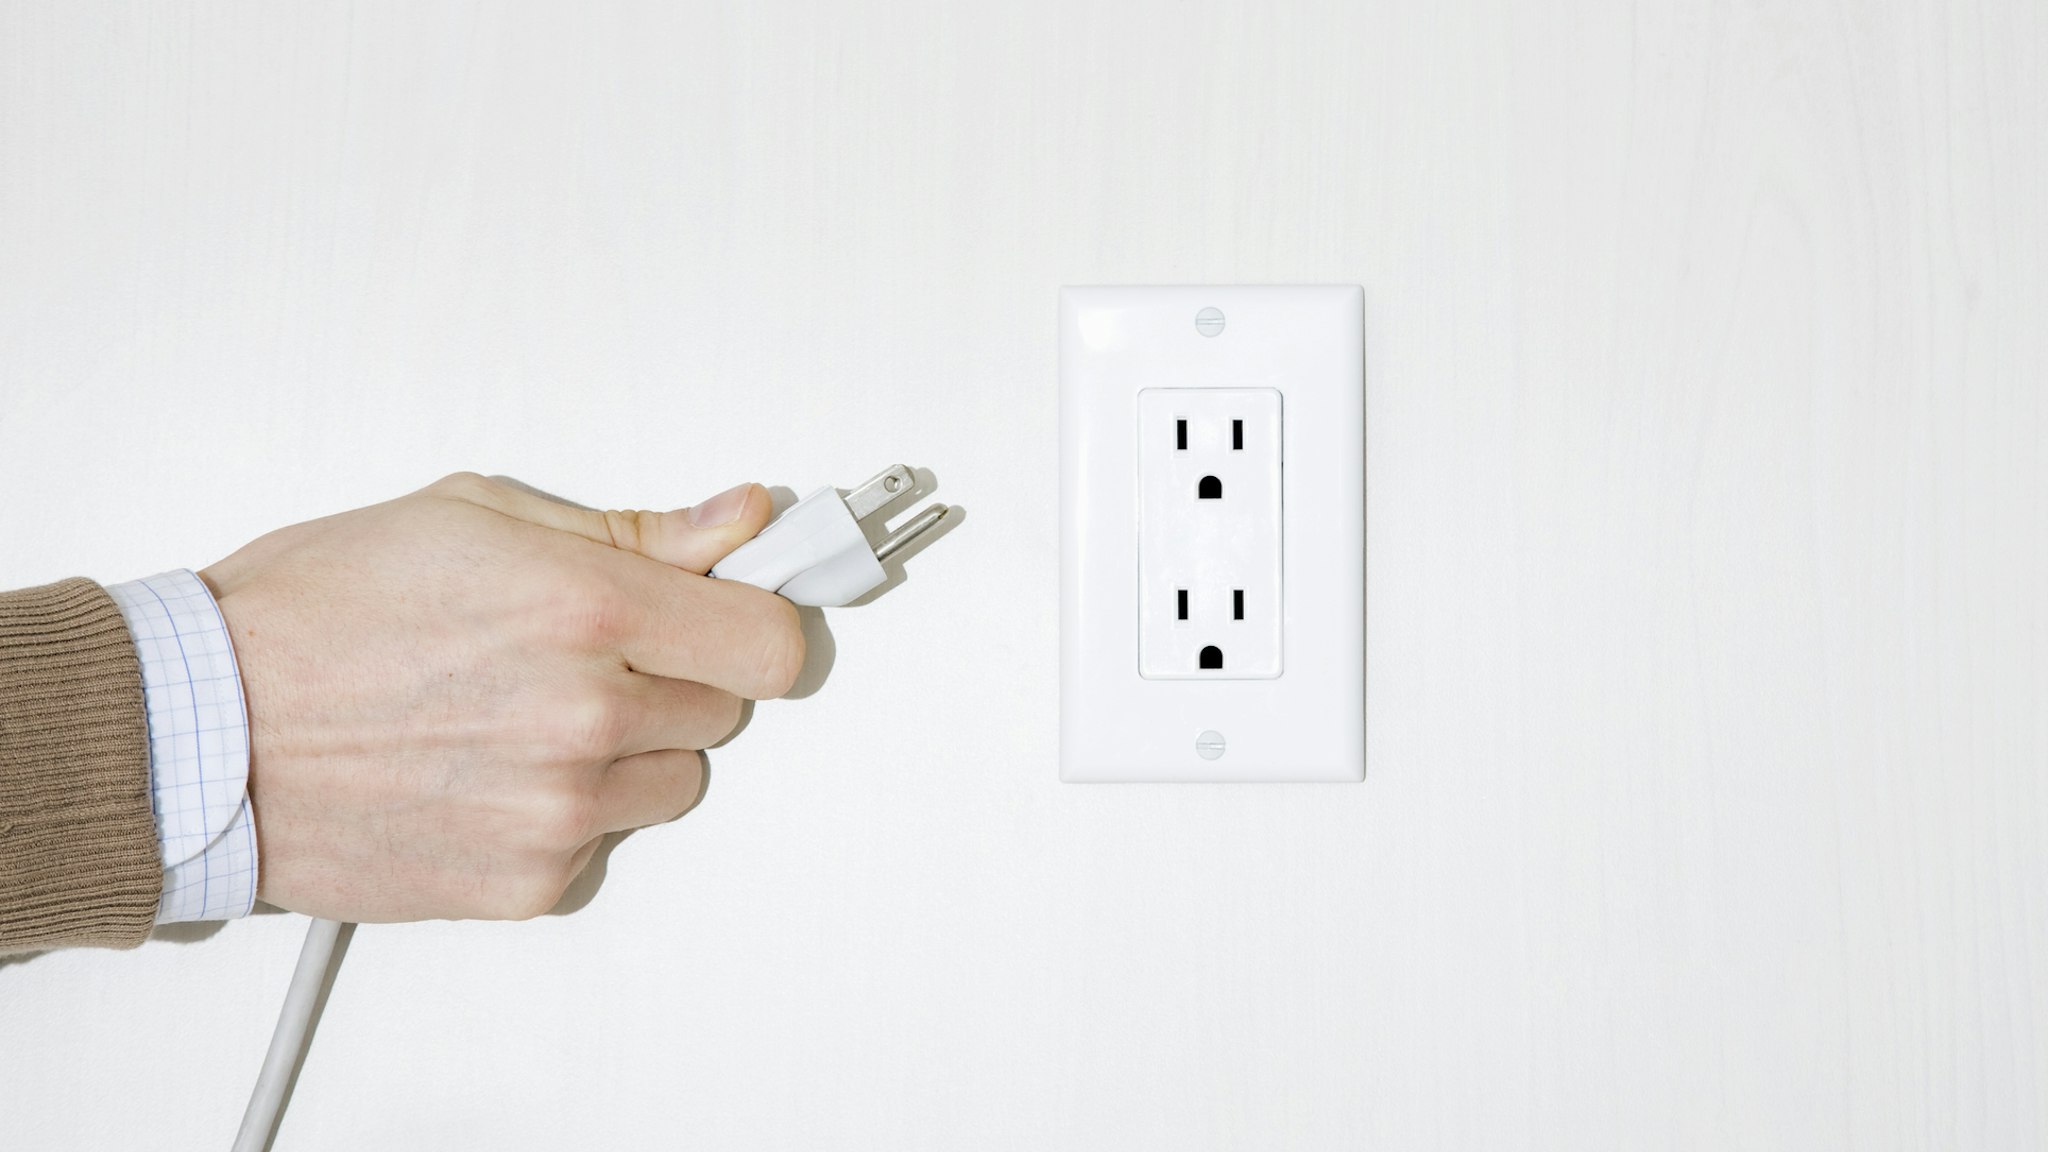 Man pulling electrical plug out of wall, close-up